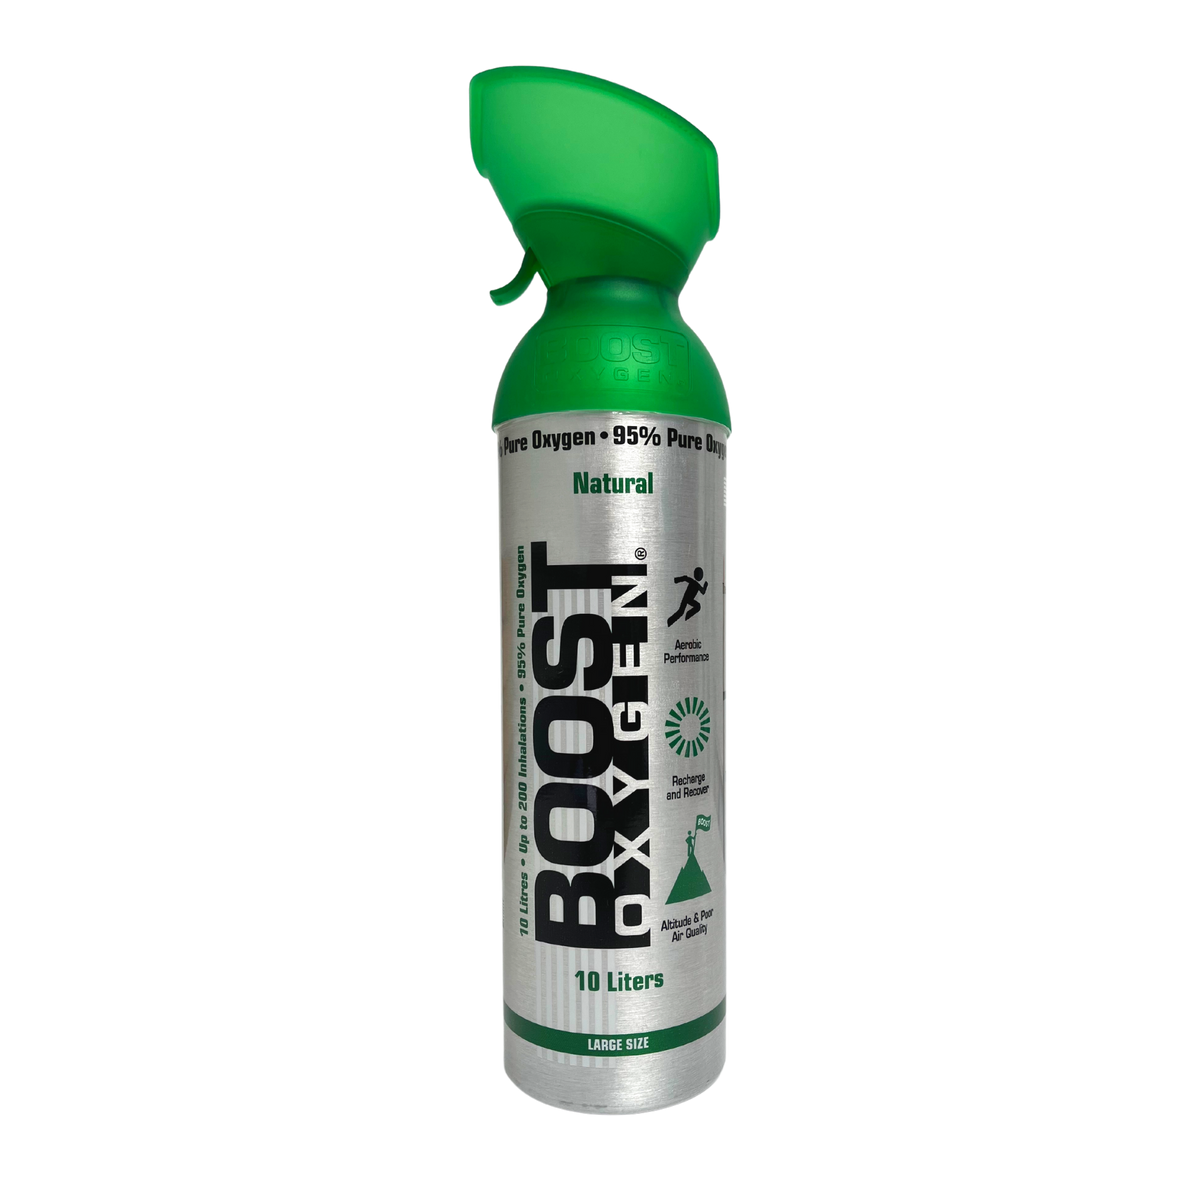 Boost Oxygen Natural 200 Breath (Large Size) - 3 Pack